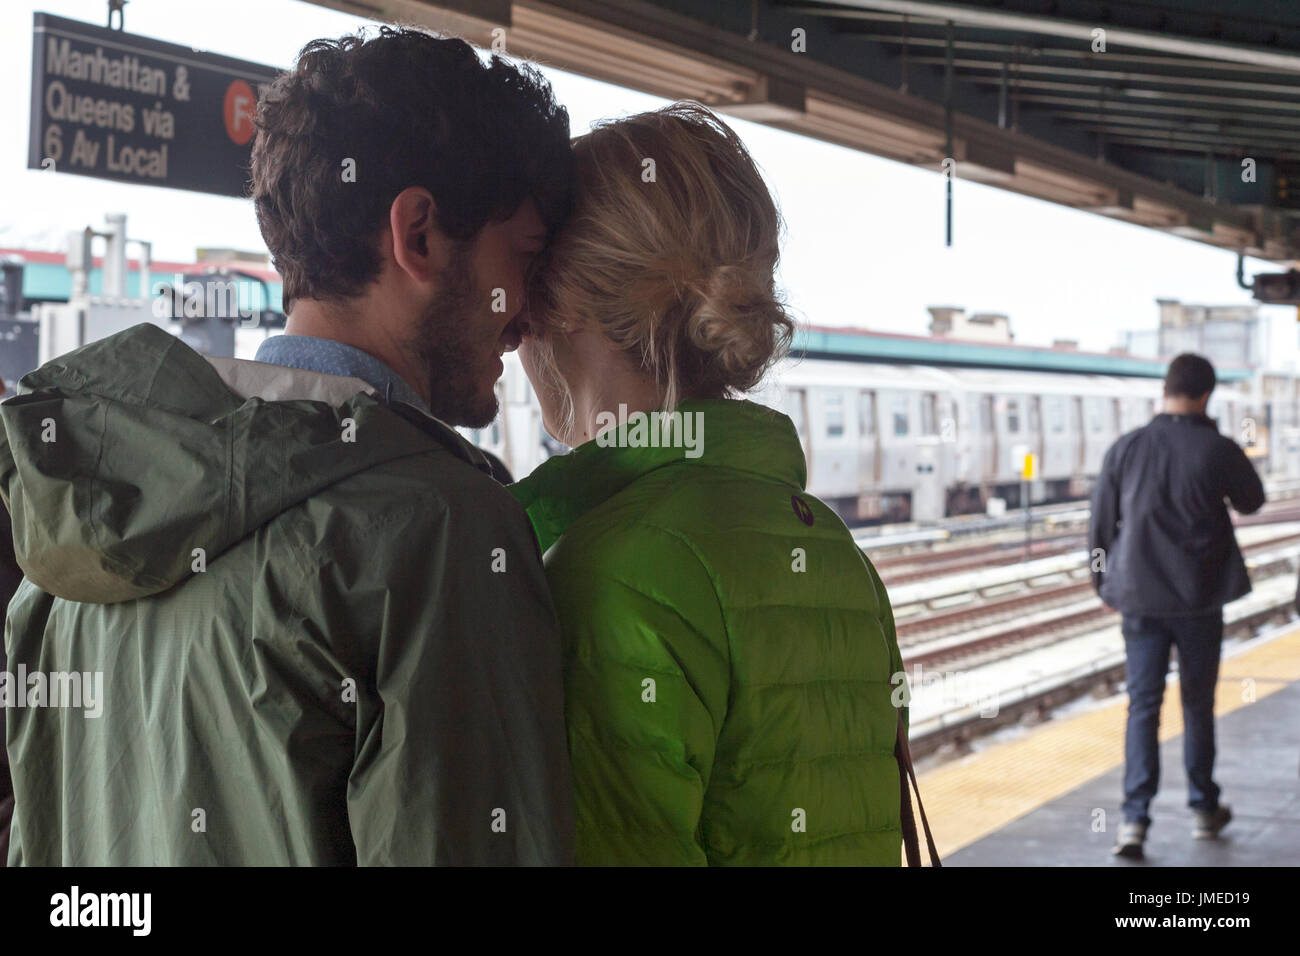 A man and woman share a moment of affection in New York City. Stock Photo